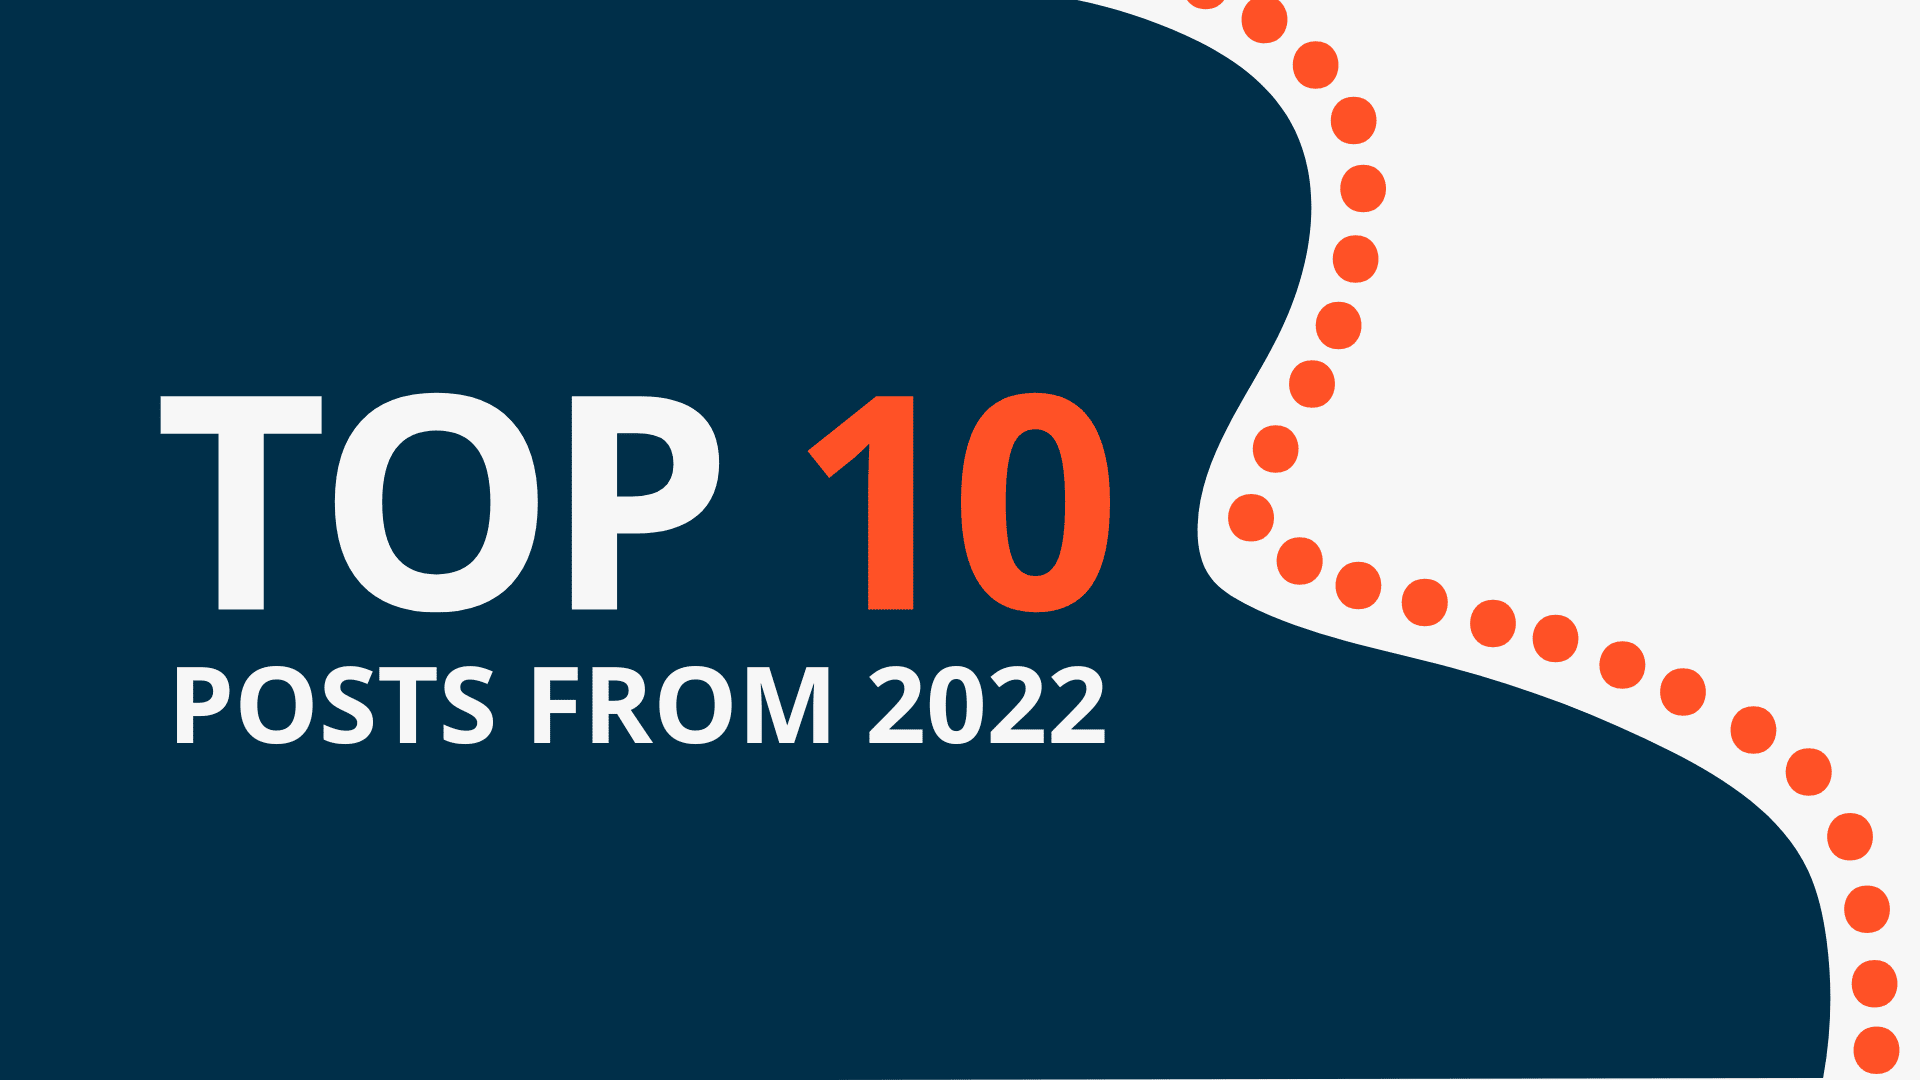 Top 10 Agility Blog posts from 2022